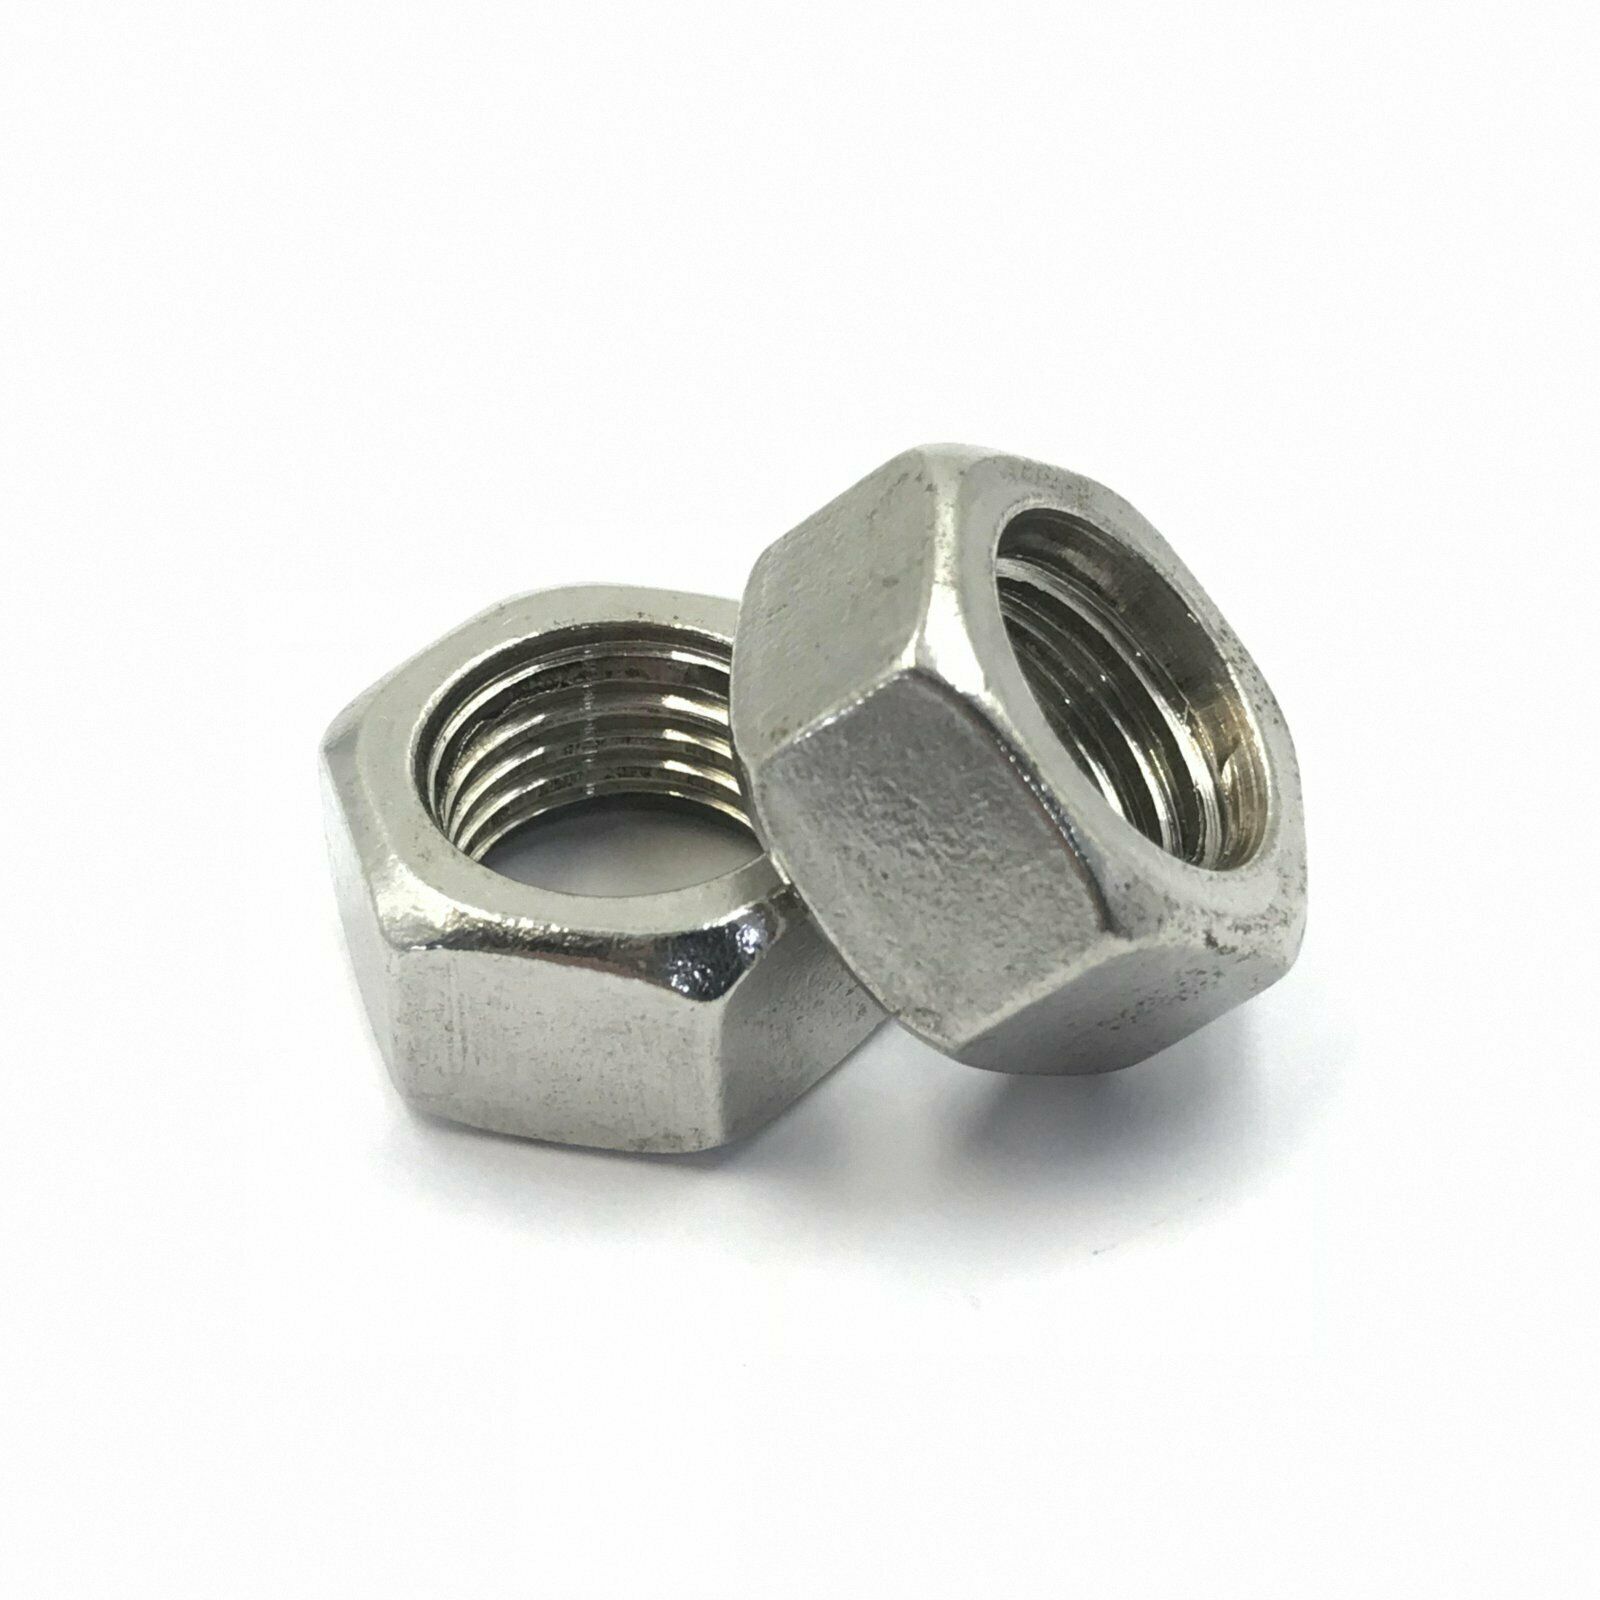 New 2Pcs M10 x 1.5 Metric Left Hand Thread Stainless Steel Hex Nut [M1]